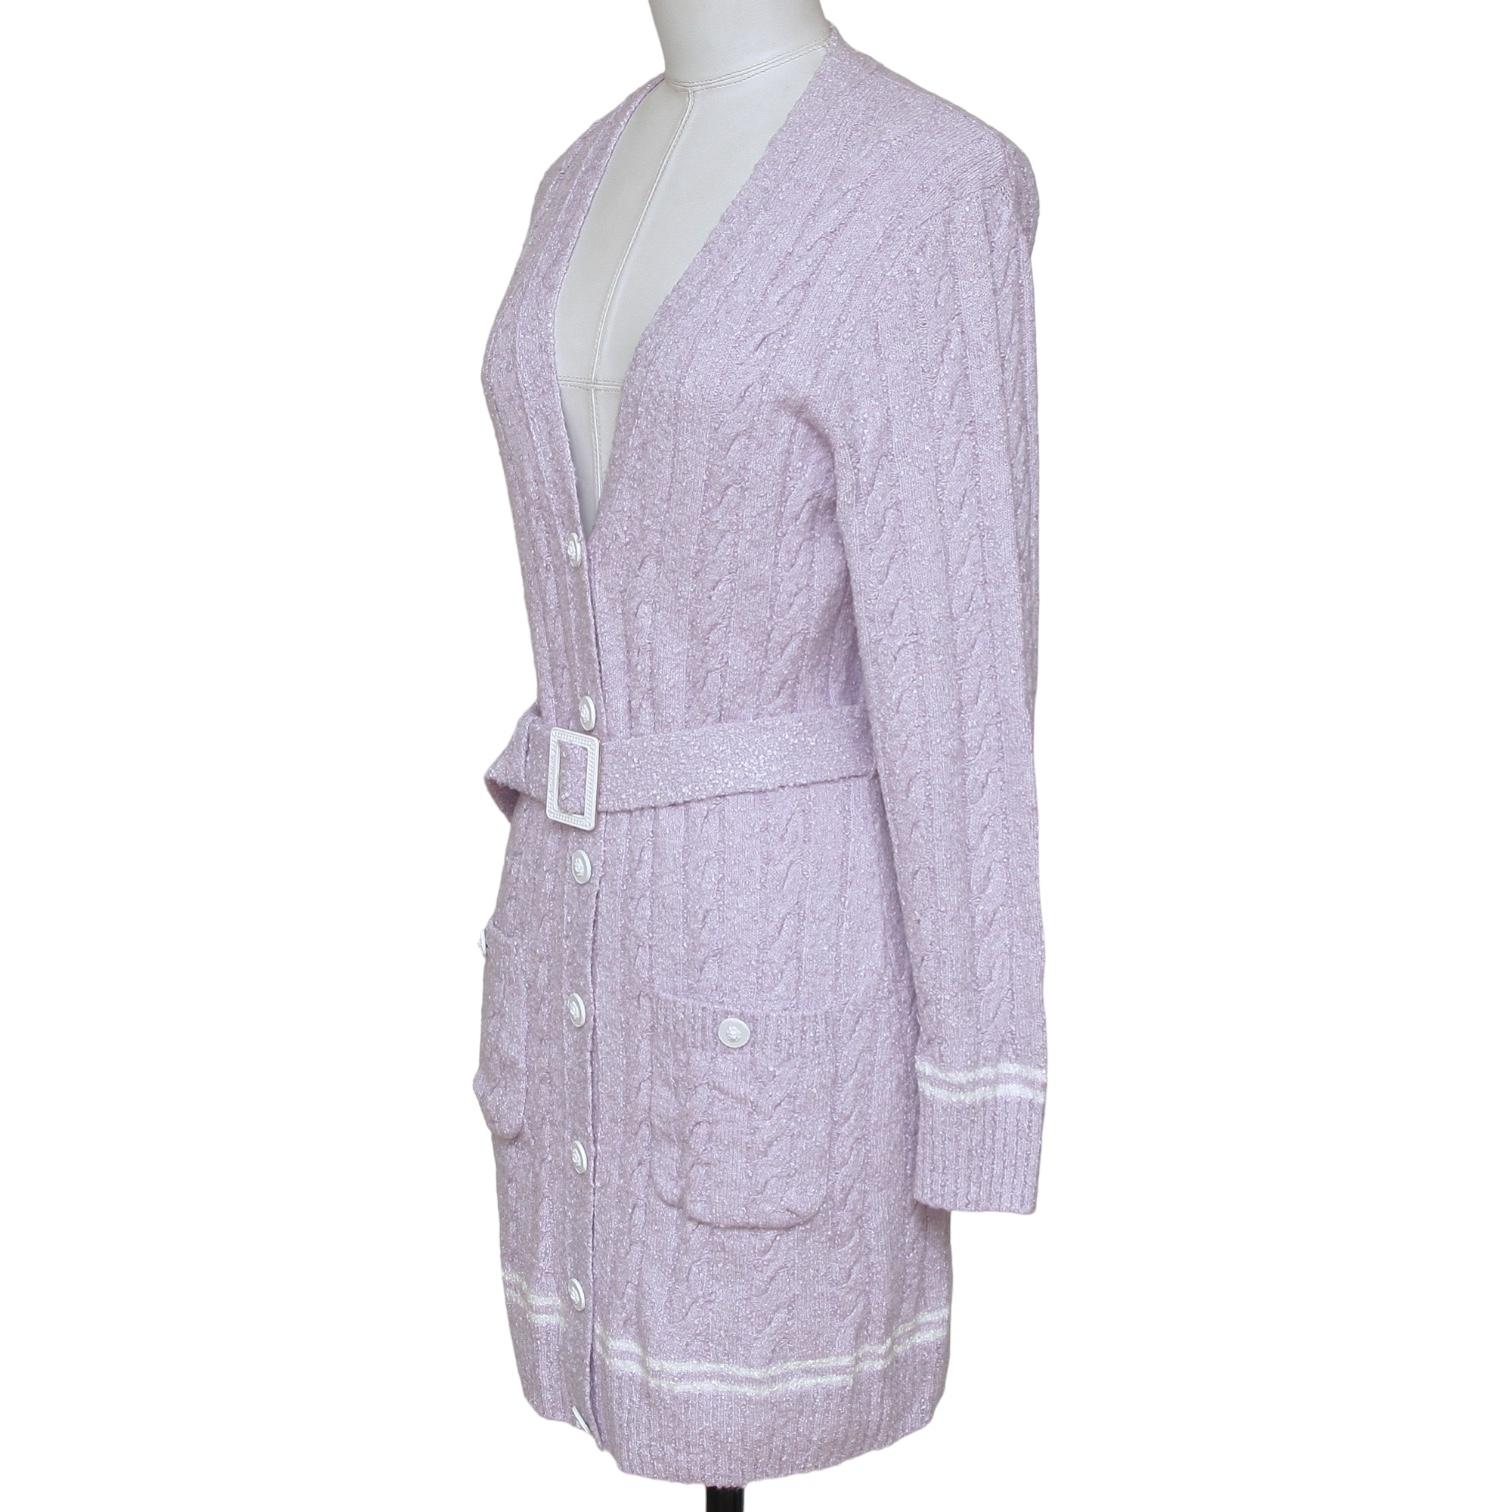 CHANEL Cardigan Sweater Knit Top Lavender White Long Sleeve Belt V-Neck 34 2022 In Excellent Condition For Sale In Hollywood, FL